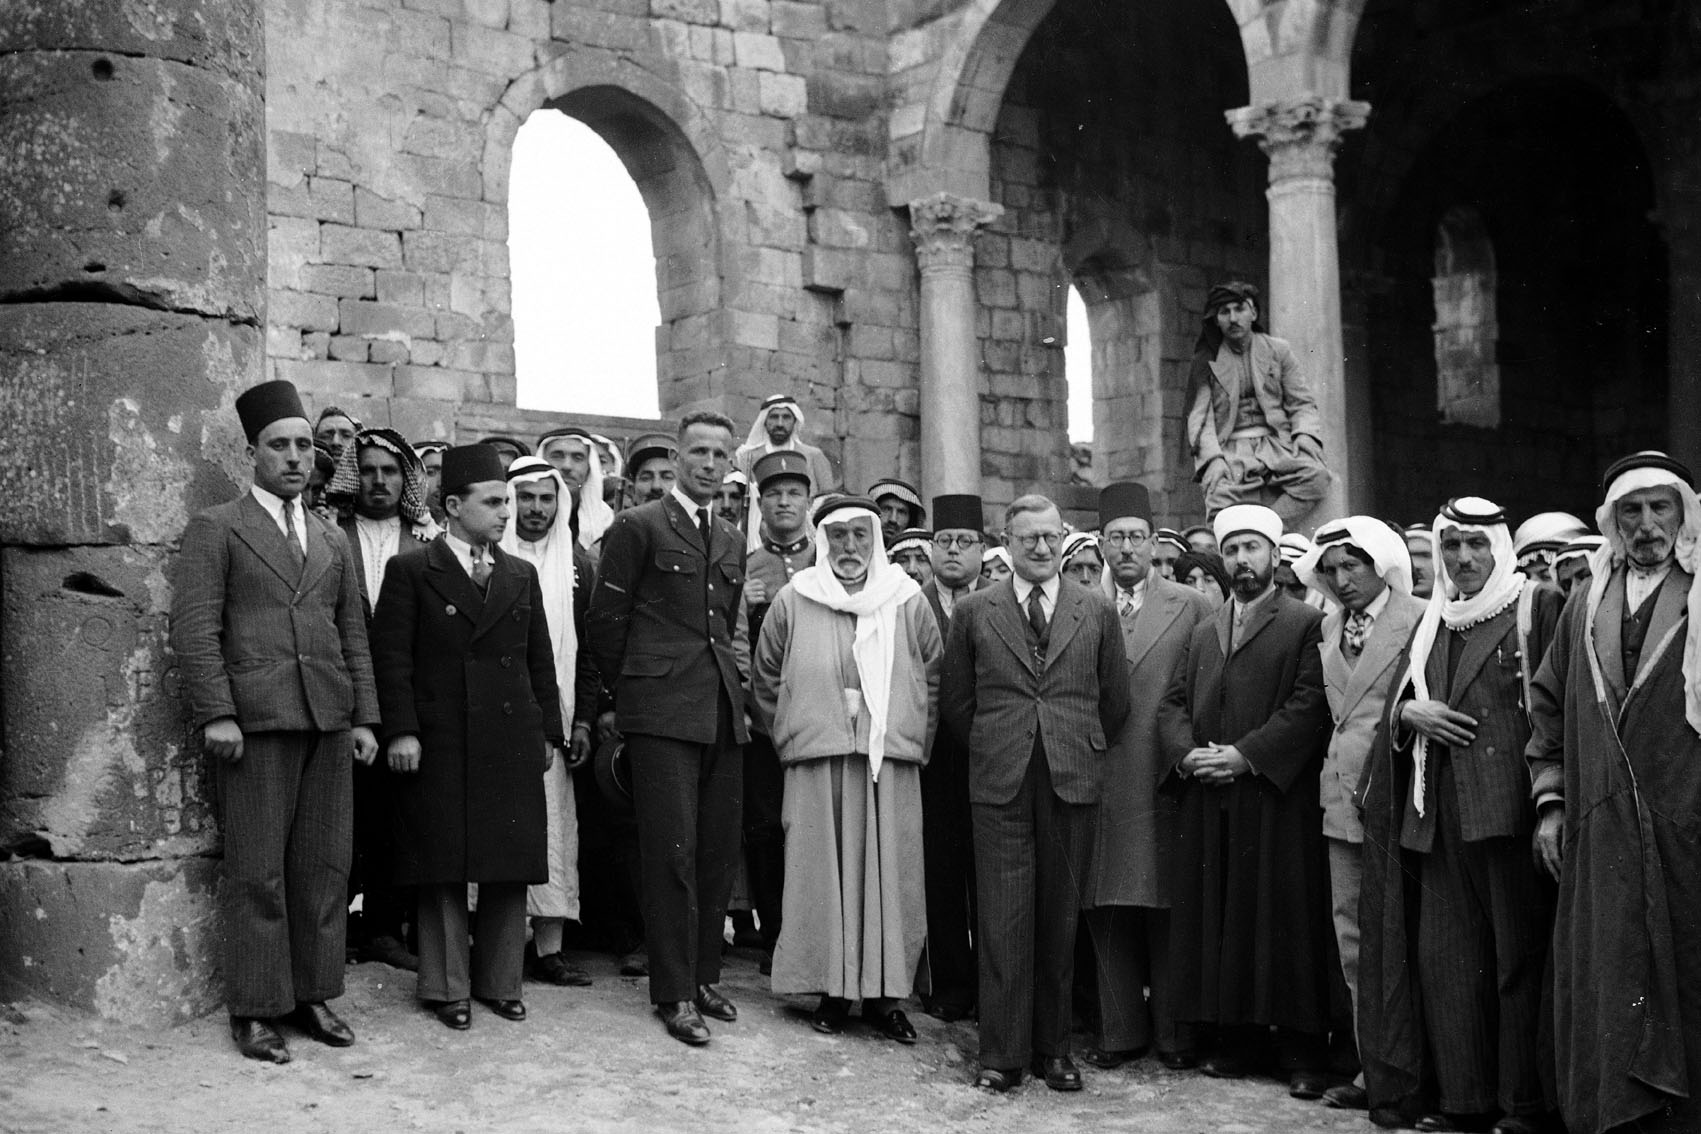 Inauguration of the restoration of the facade of the prayer hall. Écochard third from left at front in uniform